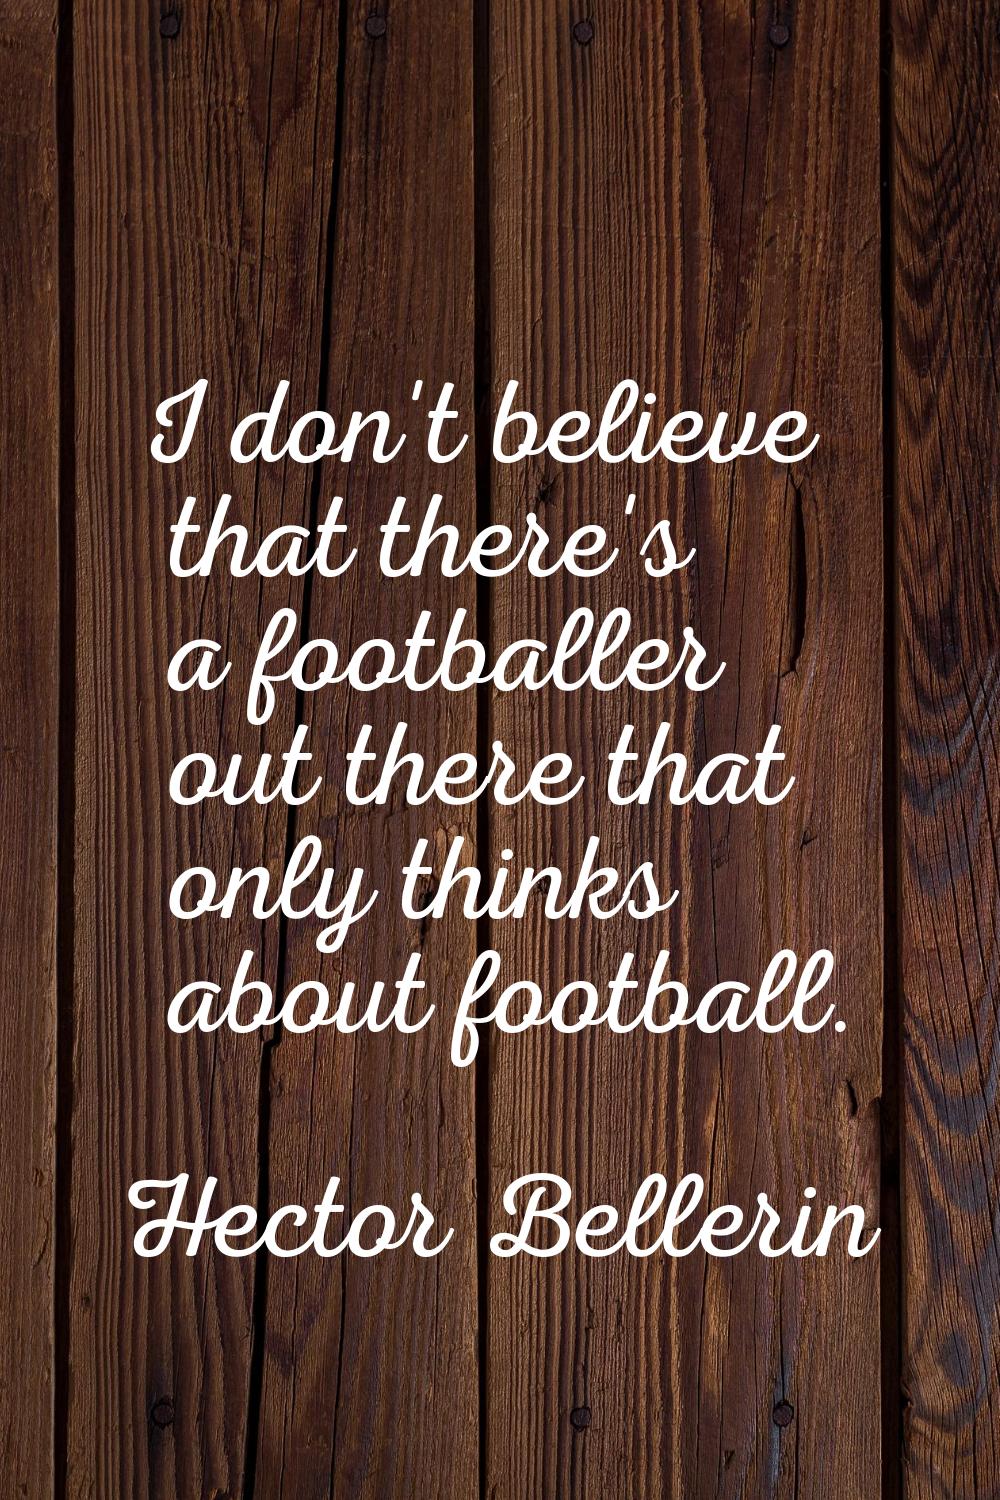 I don't believe that there's a footballer out there that only thinks about football.